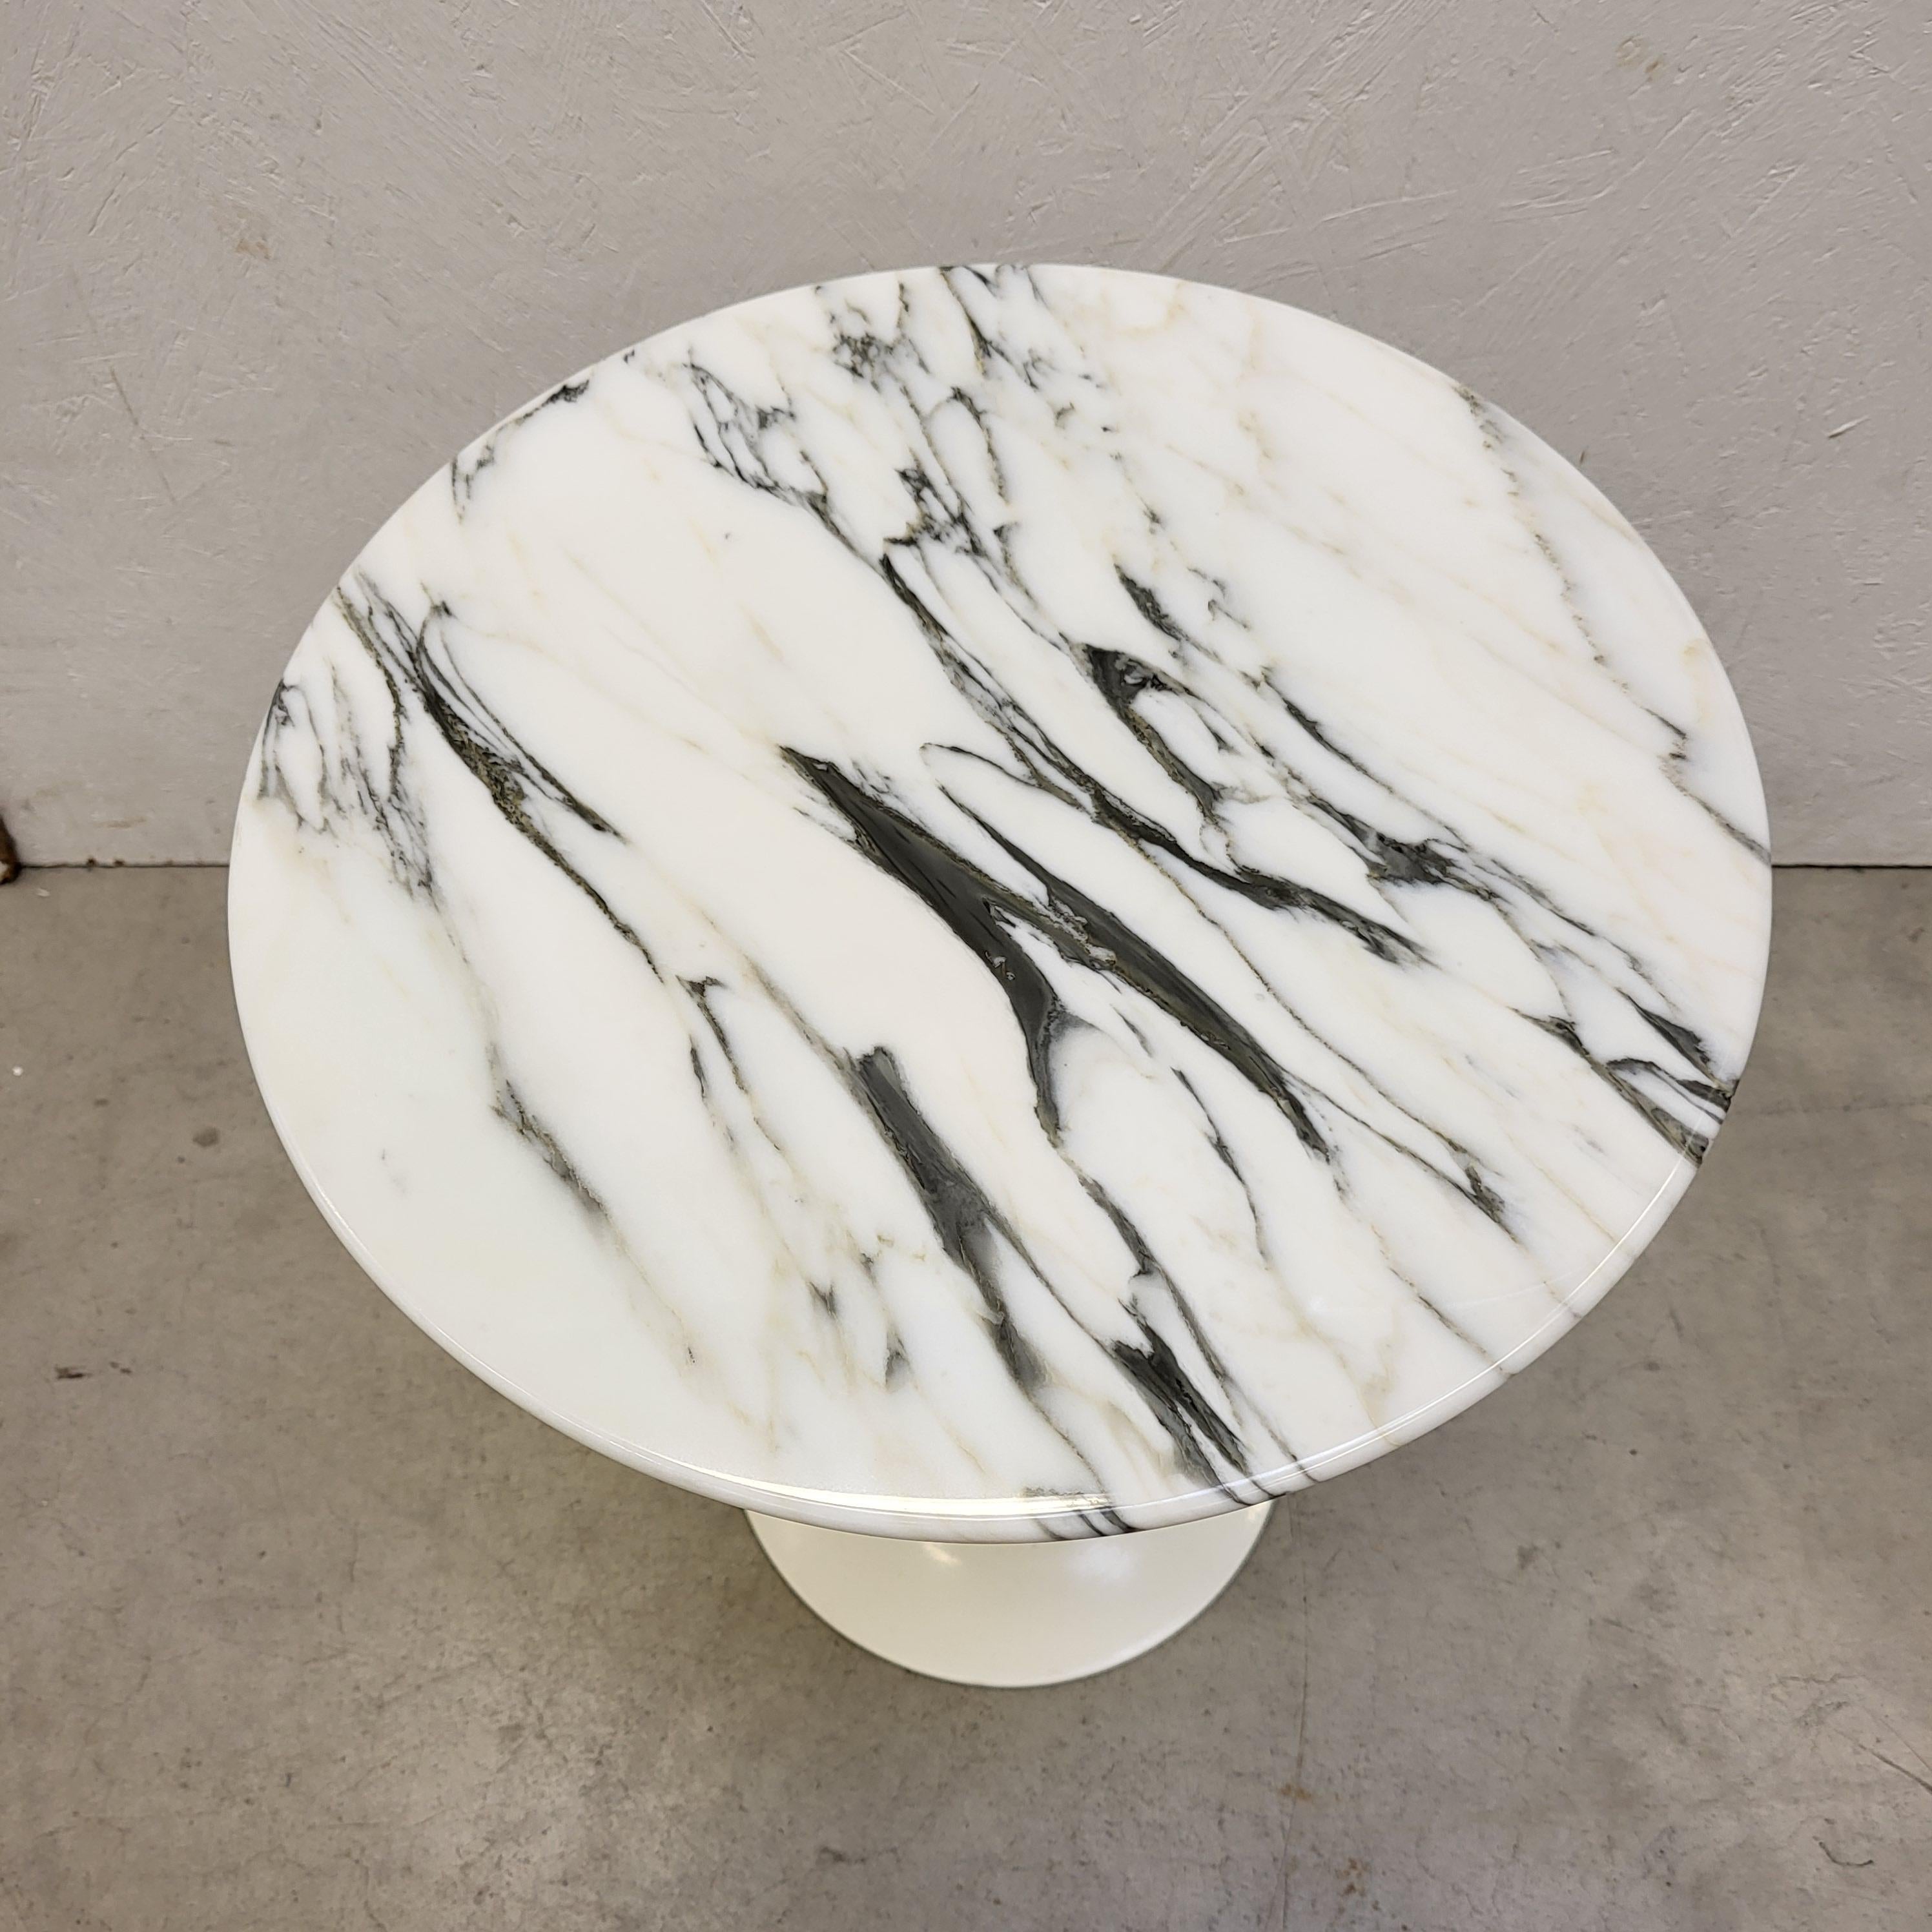 Fine and very nice tulip side table by Eero Saarinen for Knoll International.

The marble has an amazing structure and this example comes in a very good condition.
The marble hasn´t any chips or damage.

The table was made in the 1970s and comes